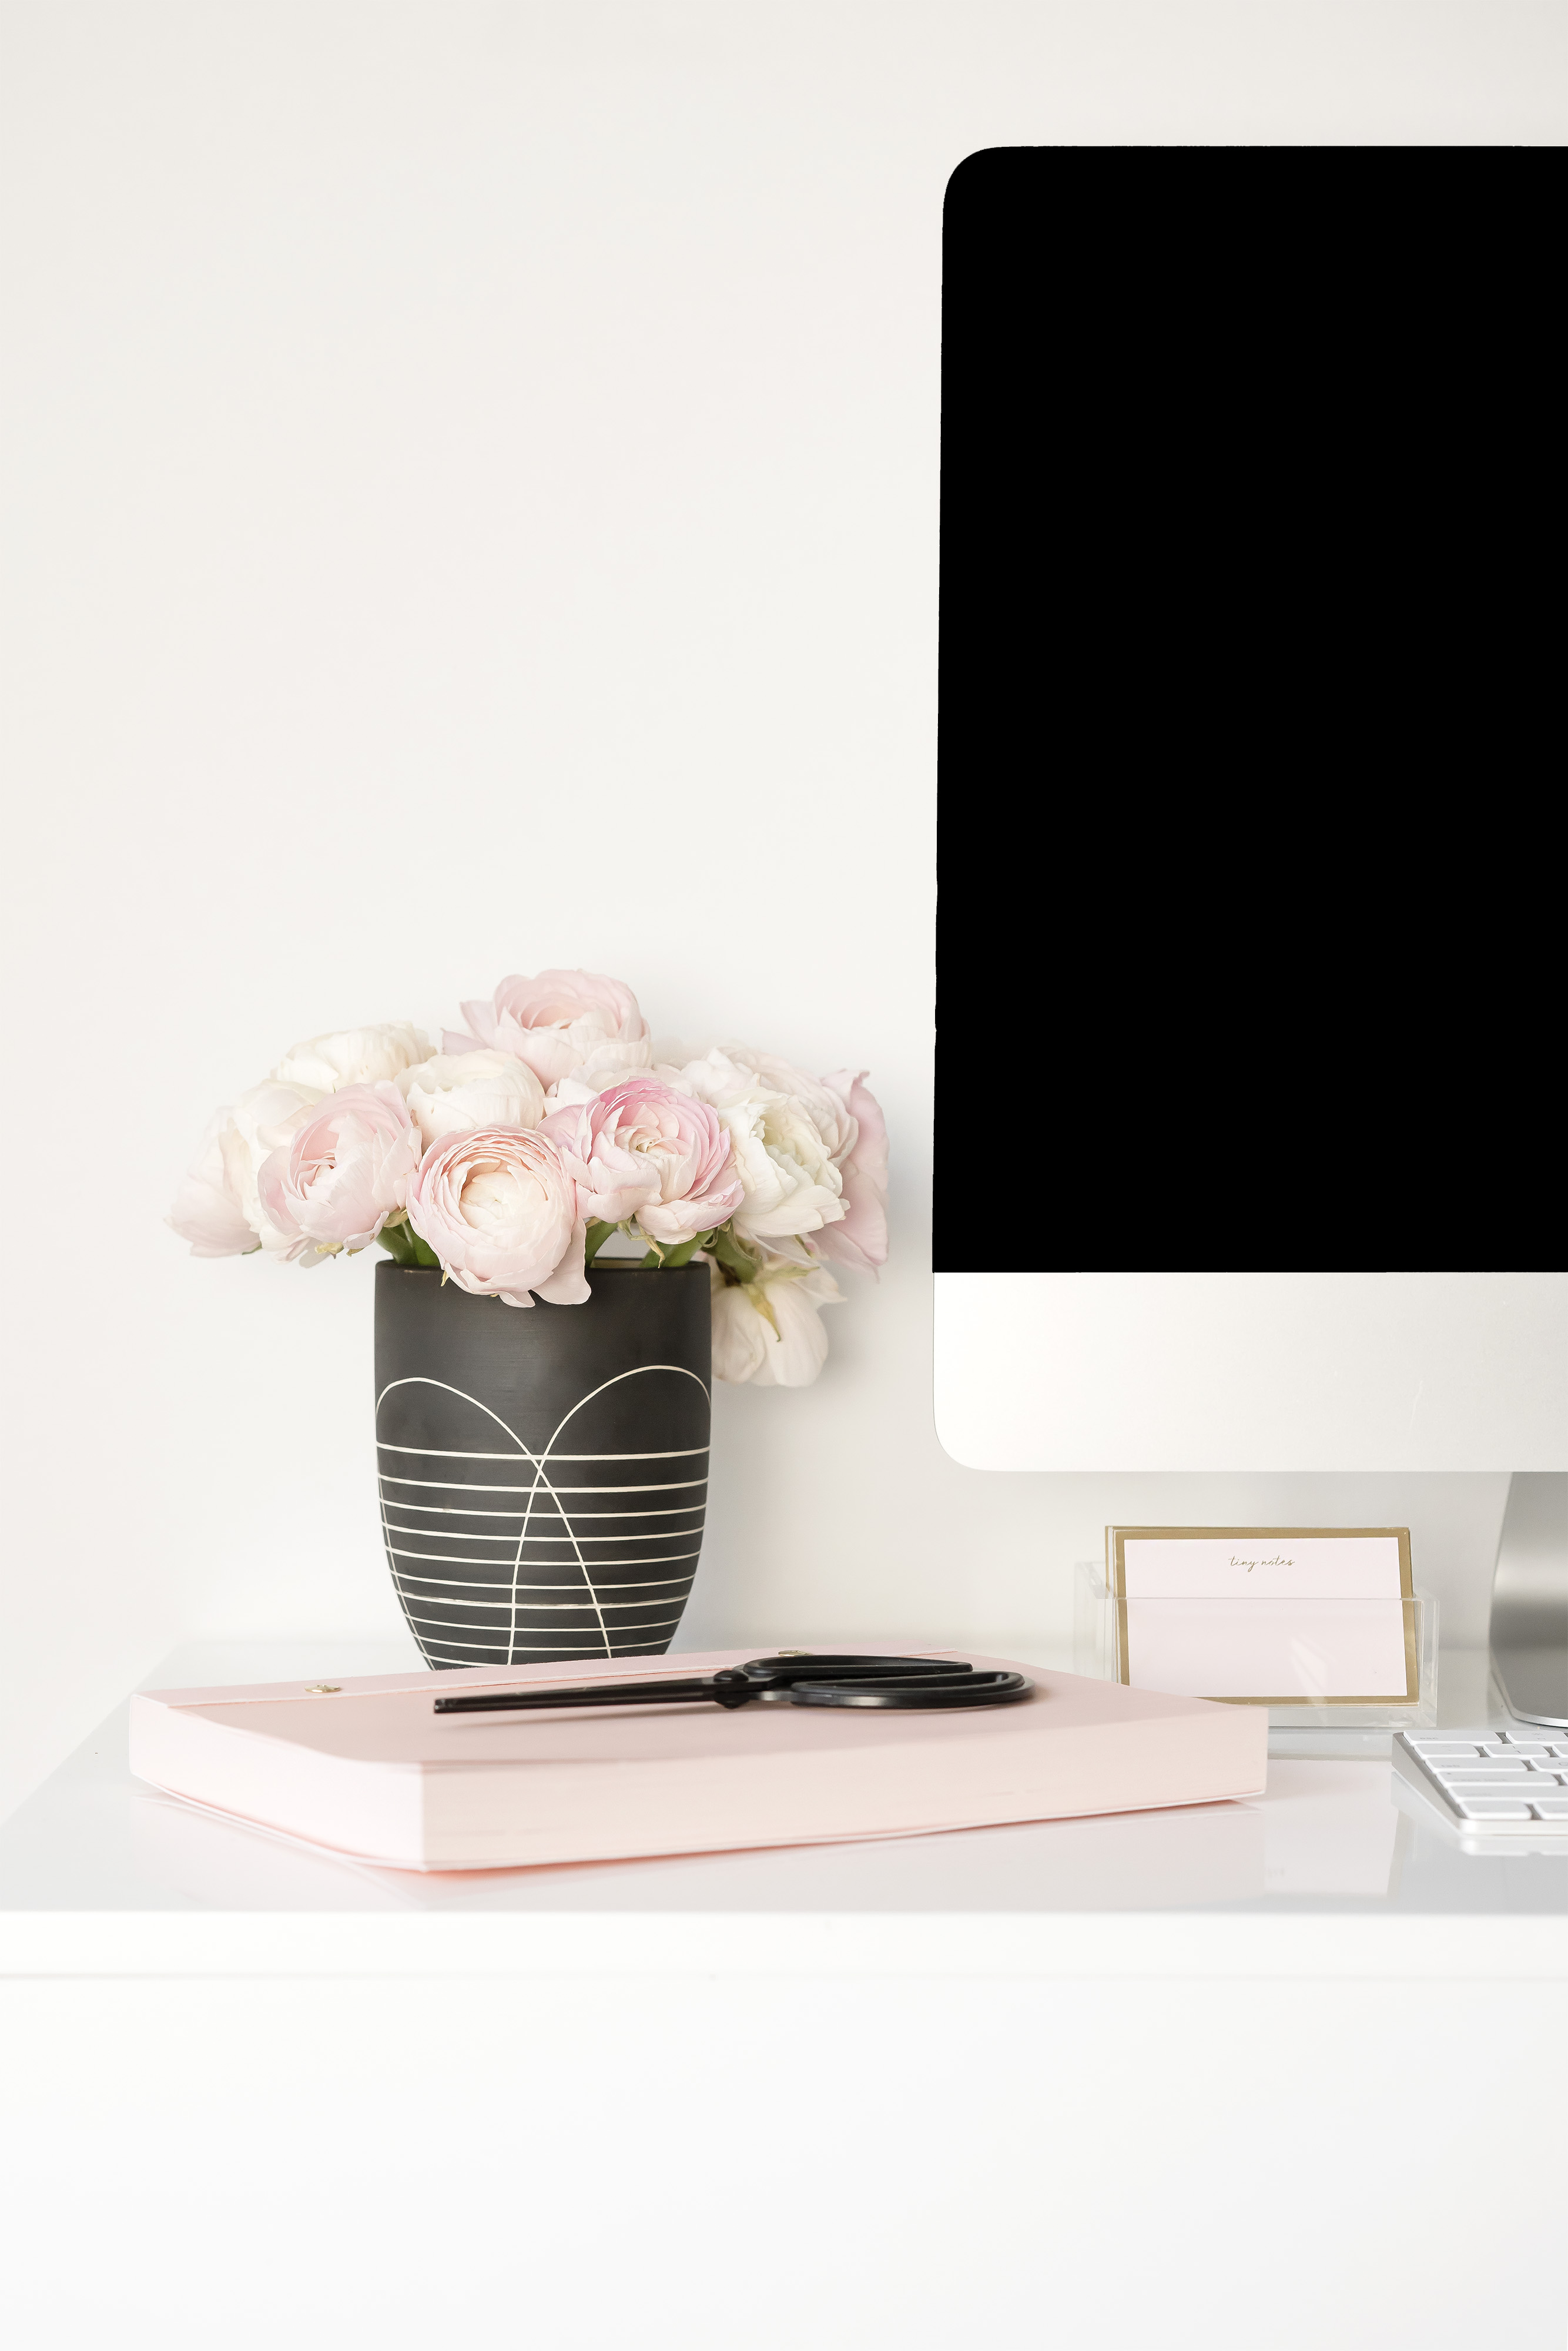 Blush iMac and flowers desktop Canva essentials online course the step-by-step program to guide you through all the essentials you need even with zero design skills